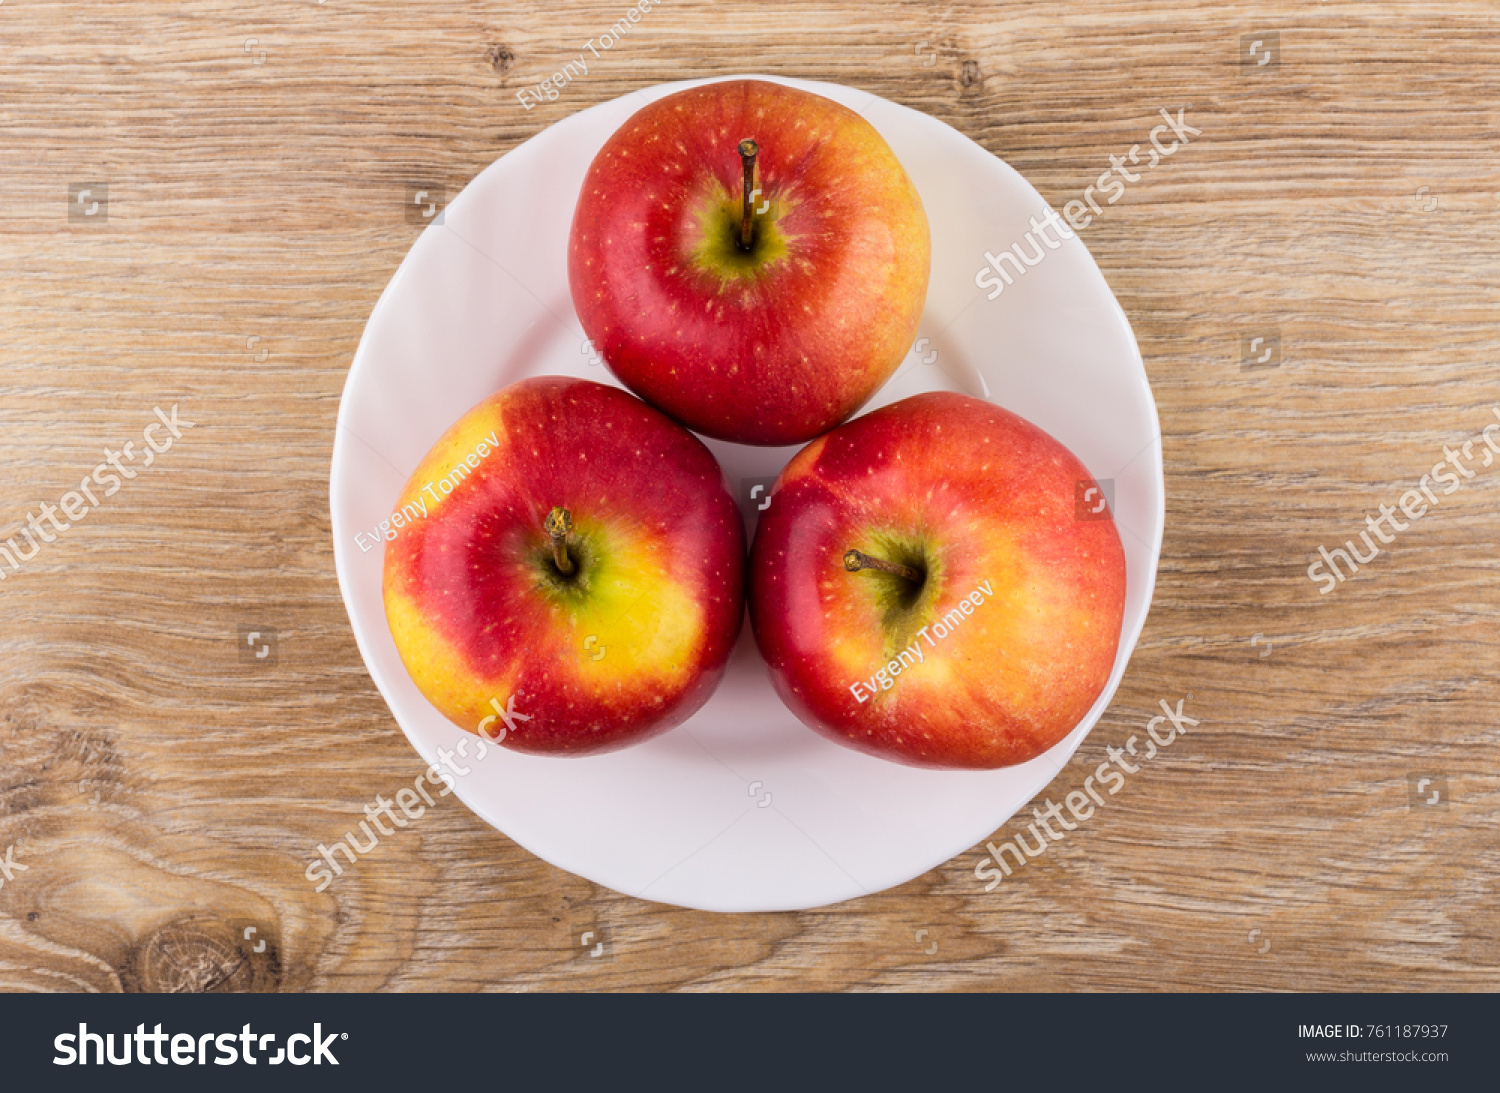 Ripe red apples in white dish on wooden table. Top view #761187937